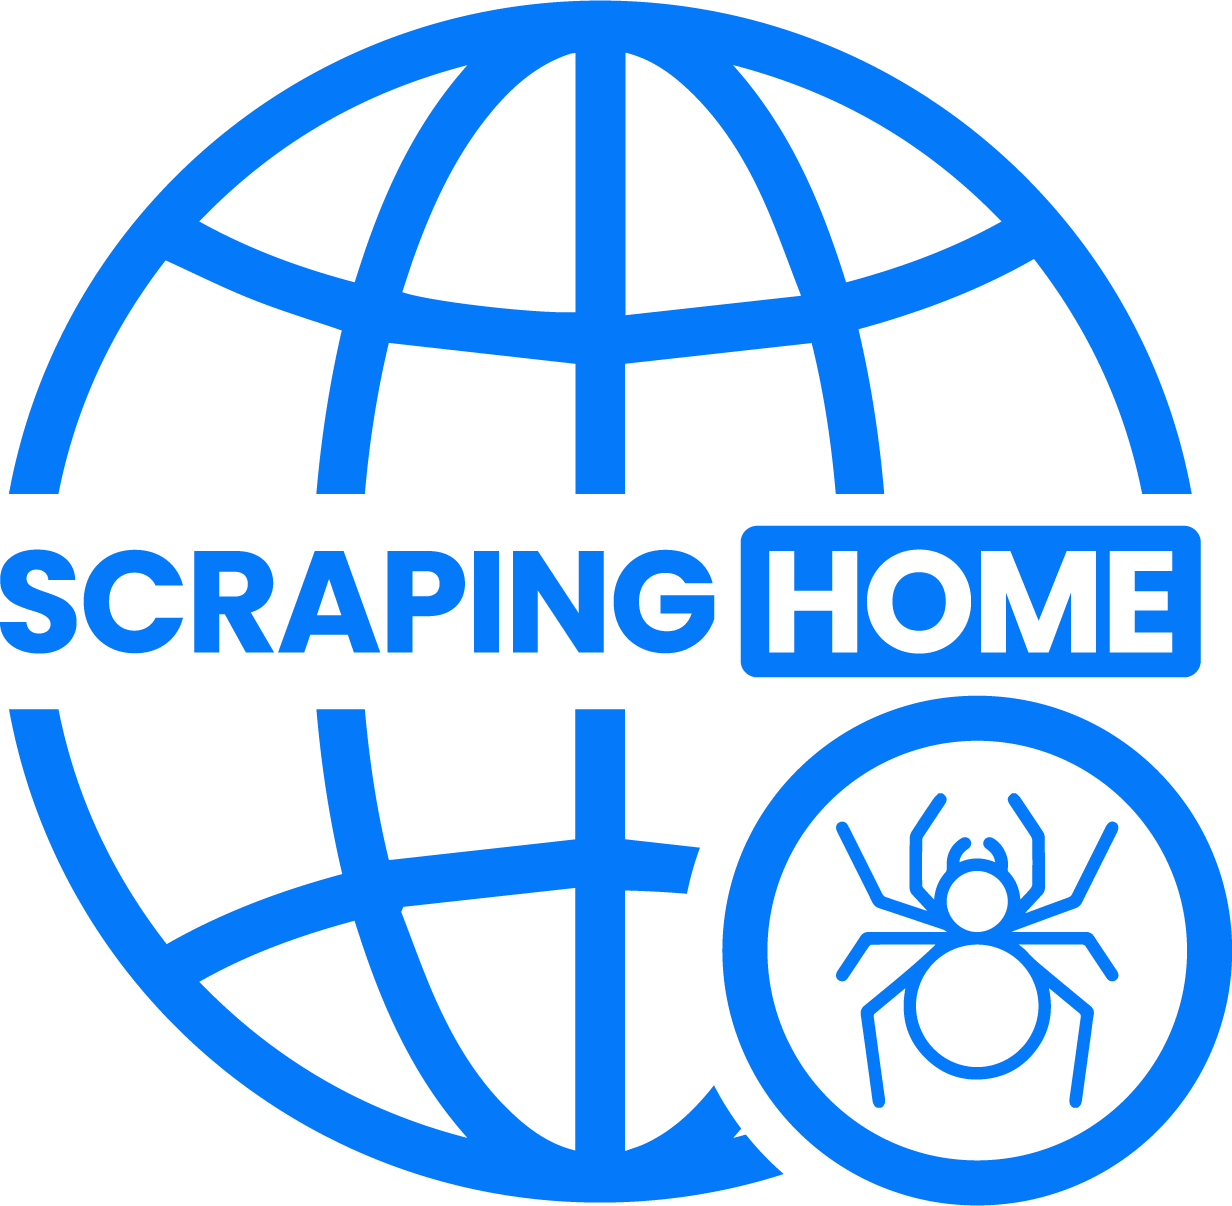 Scraping home